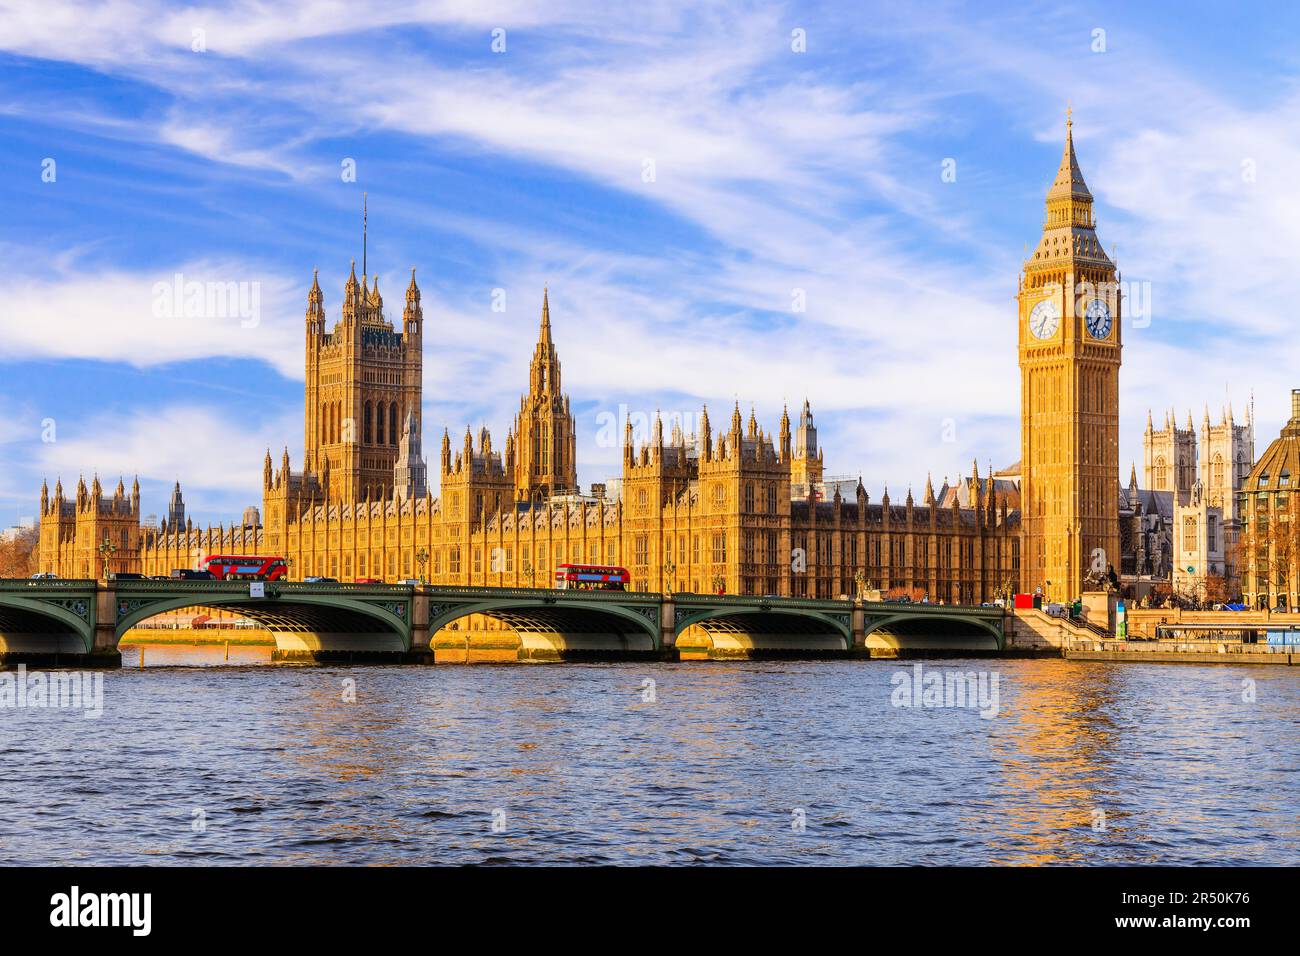 London, United Kingdom. The Palace of Westminster, Big Ben, and Westminster Bridge. Stock Photo